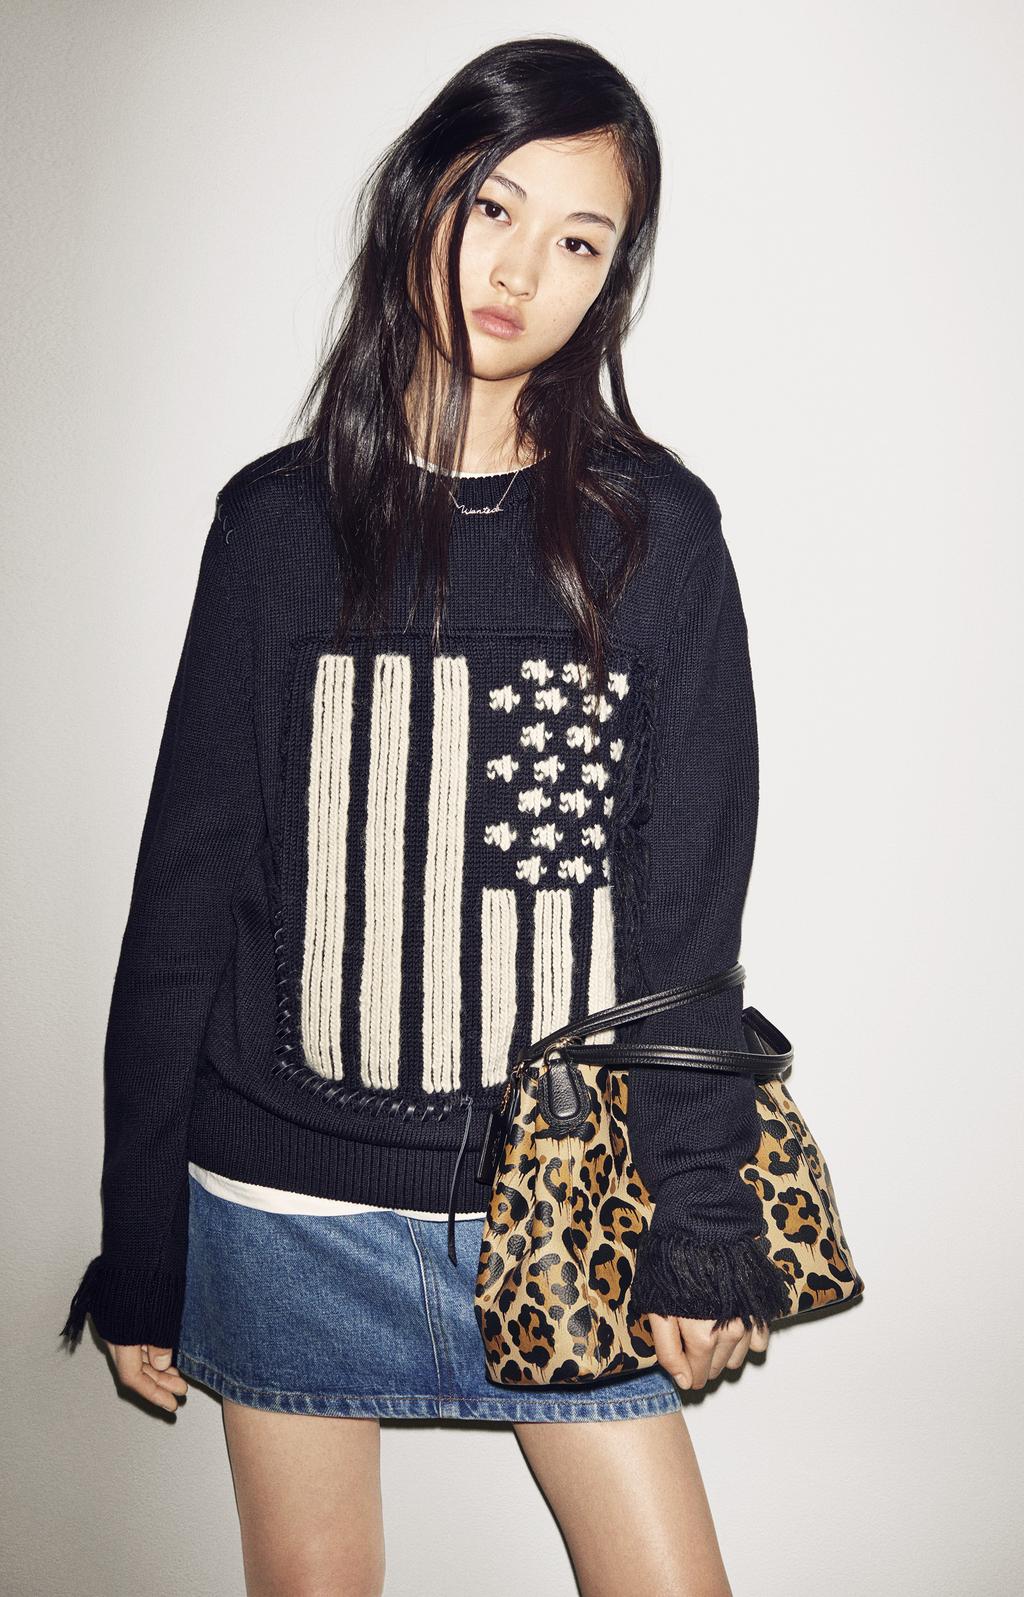 THE WILD BEAST STIRS For FALL 2015, WILD BEAST makes an EXCLUSIVE, reimagined animal